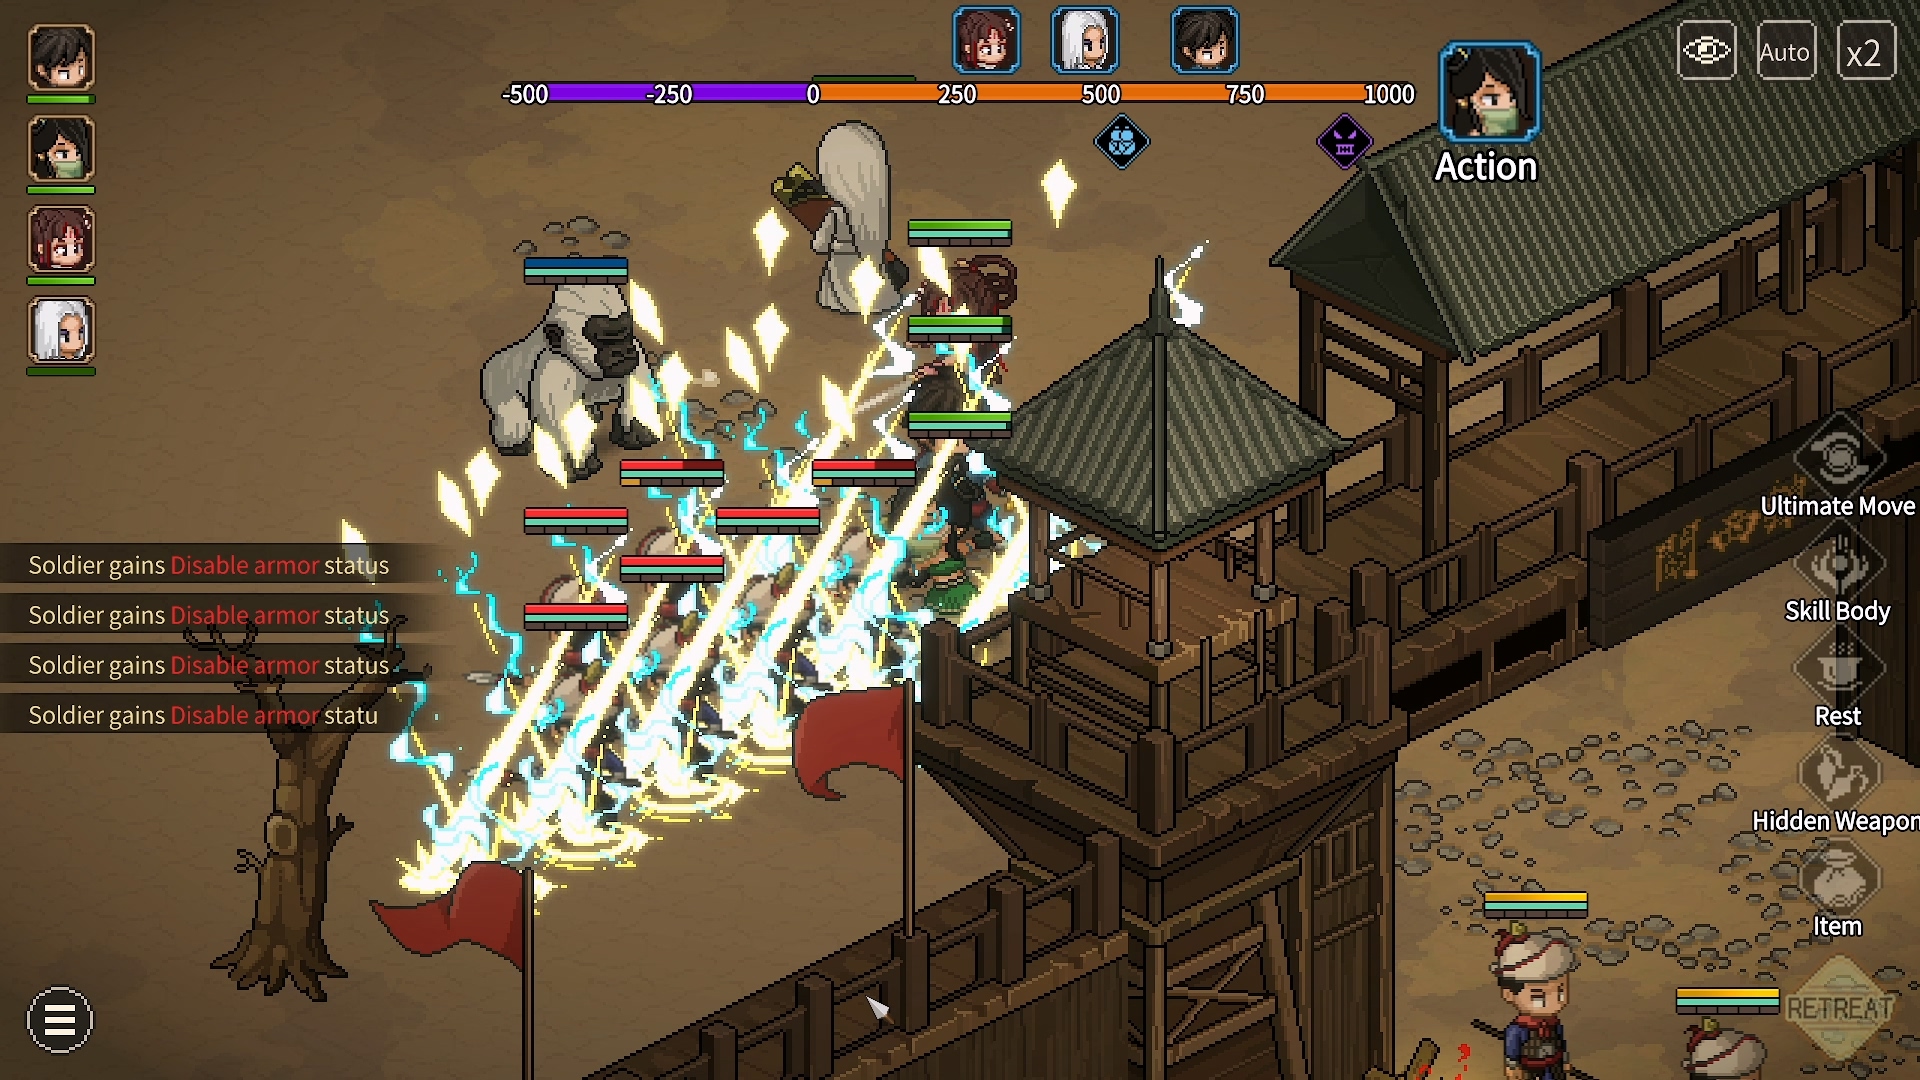 Pixel-art martial artists in tactical RPG Hero's Adventure: Road to Passion